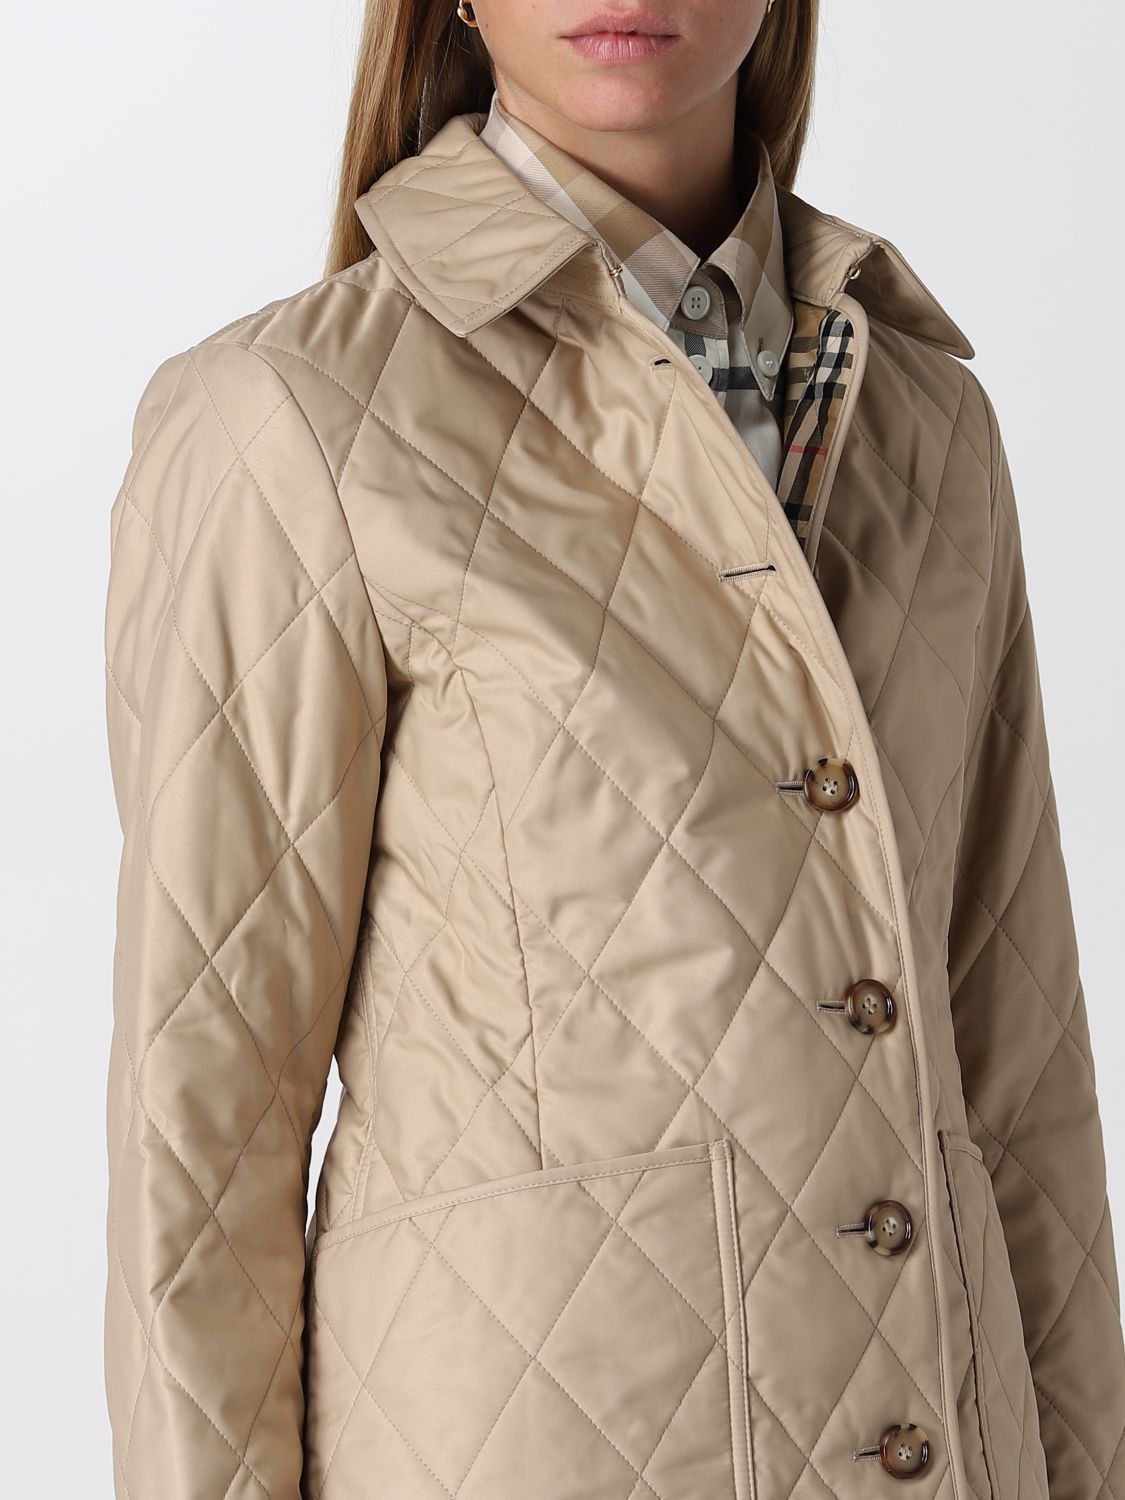 Shop Burberry Frankby Quilted Jacket Saks Fifth Avenue |  